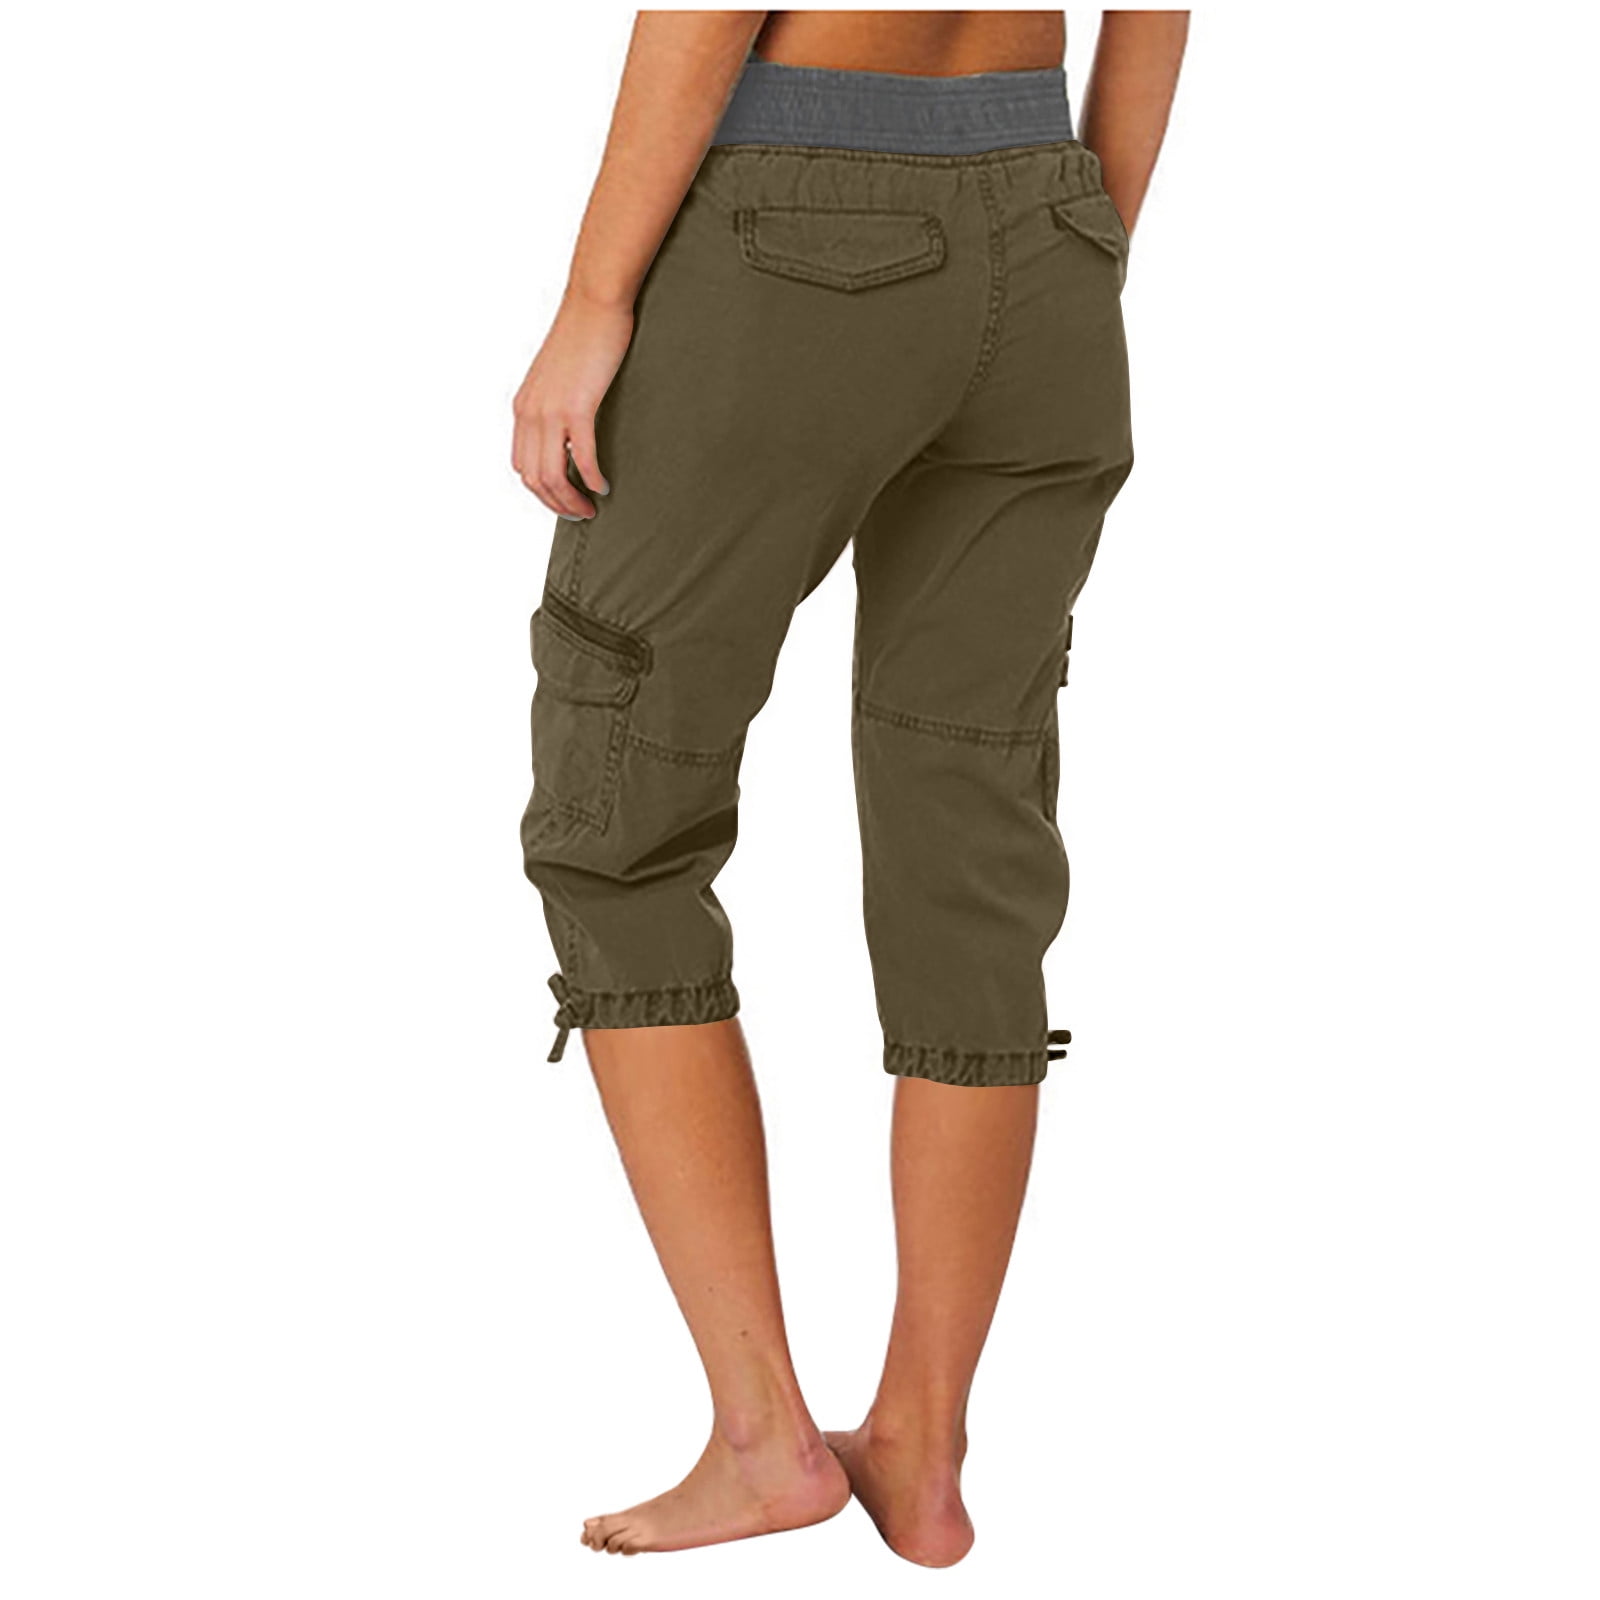 Womens Lightweight Pants Plus Size Women Capri Pants Cargo Pants for Women  with Pockets Really Cheap Stuff Under 50 Cents My Shopping Cart Today Deals  10 and Under Items Gift for Woman Zipper Black at  Women's Clothing  store